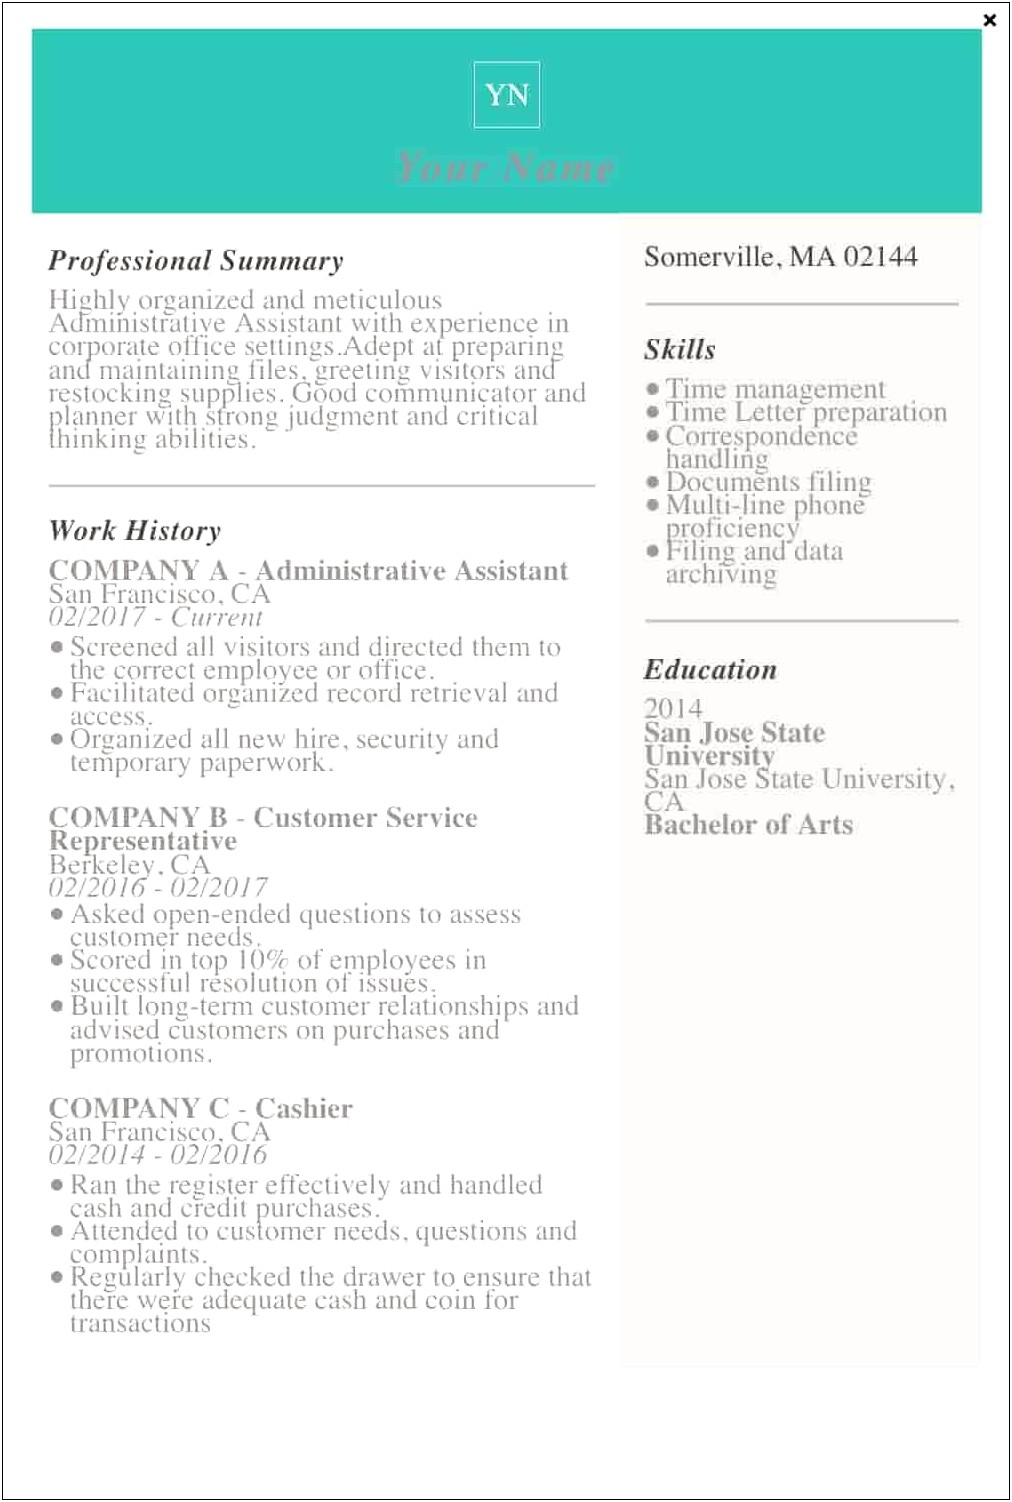 Resume Objective Letter After Long Time Not Working